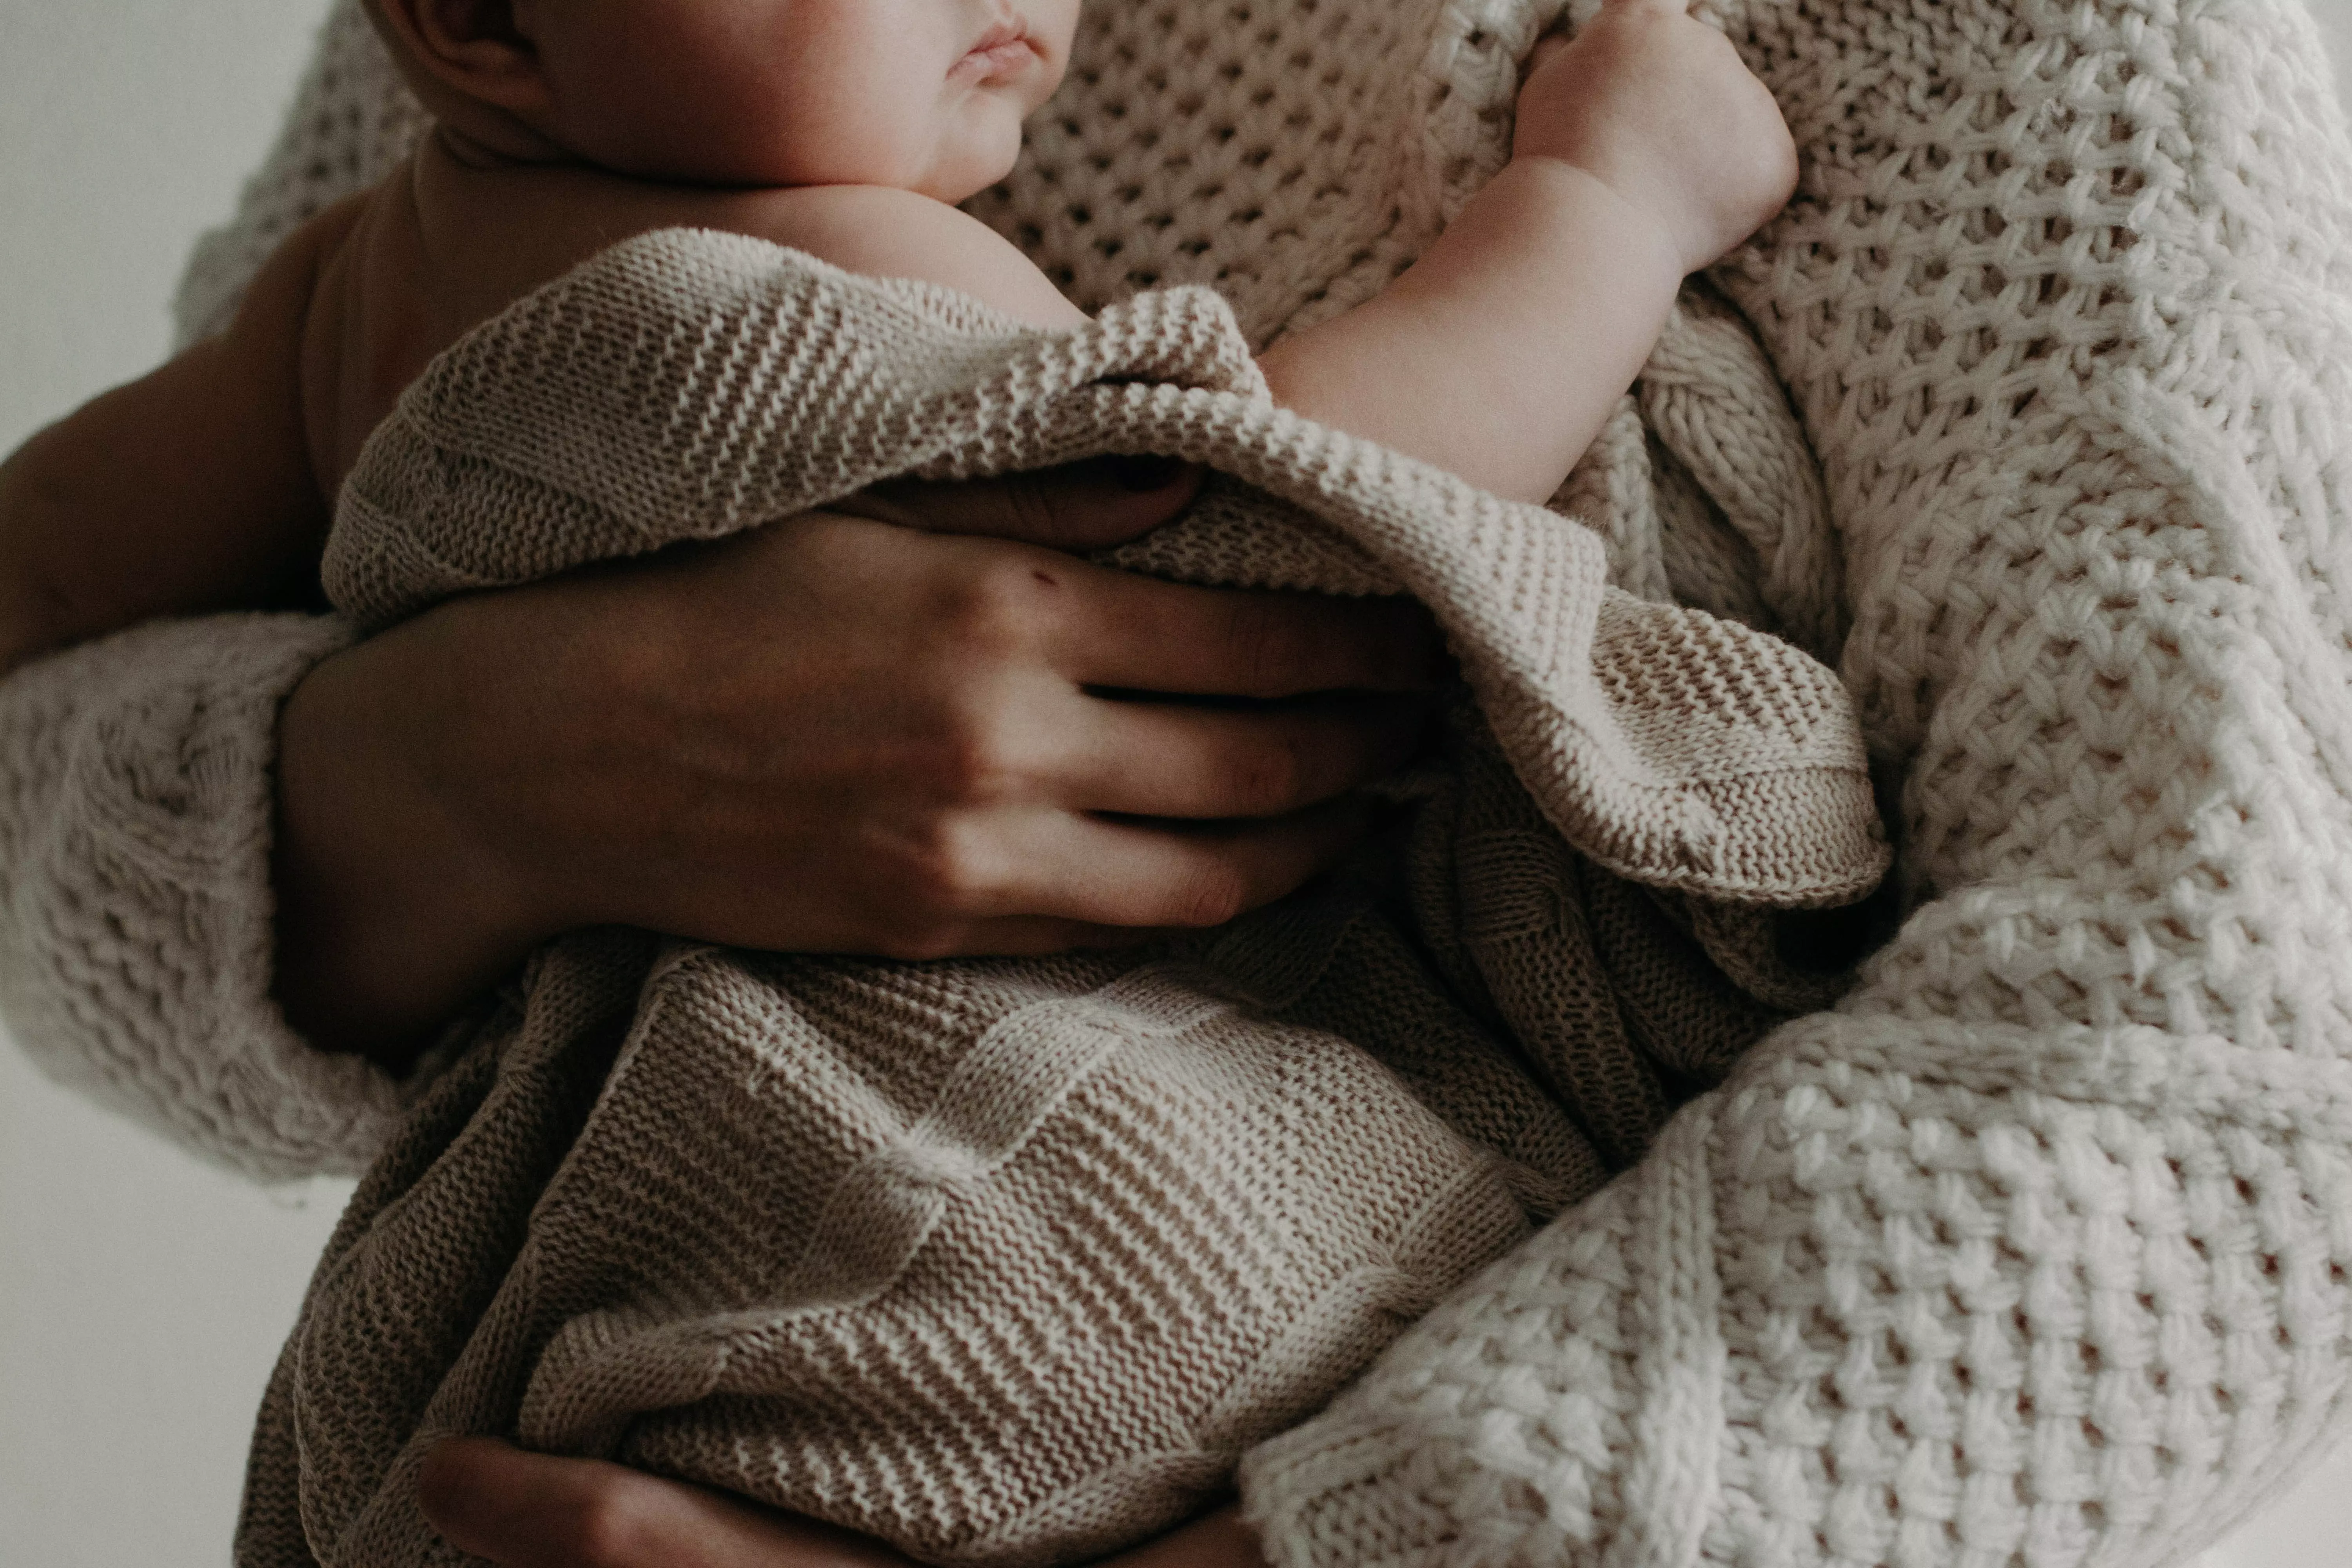 Blog – Benefits of breastfeeding for mom and baby